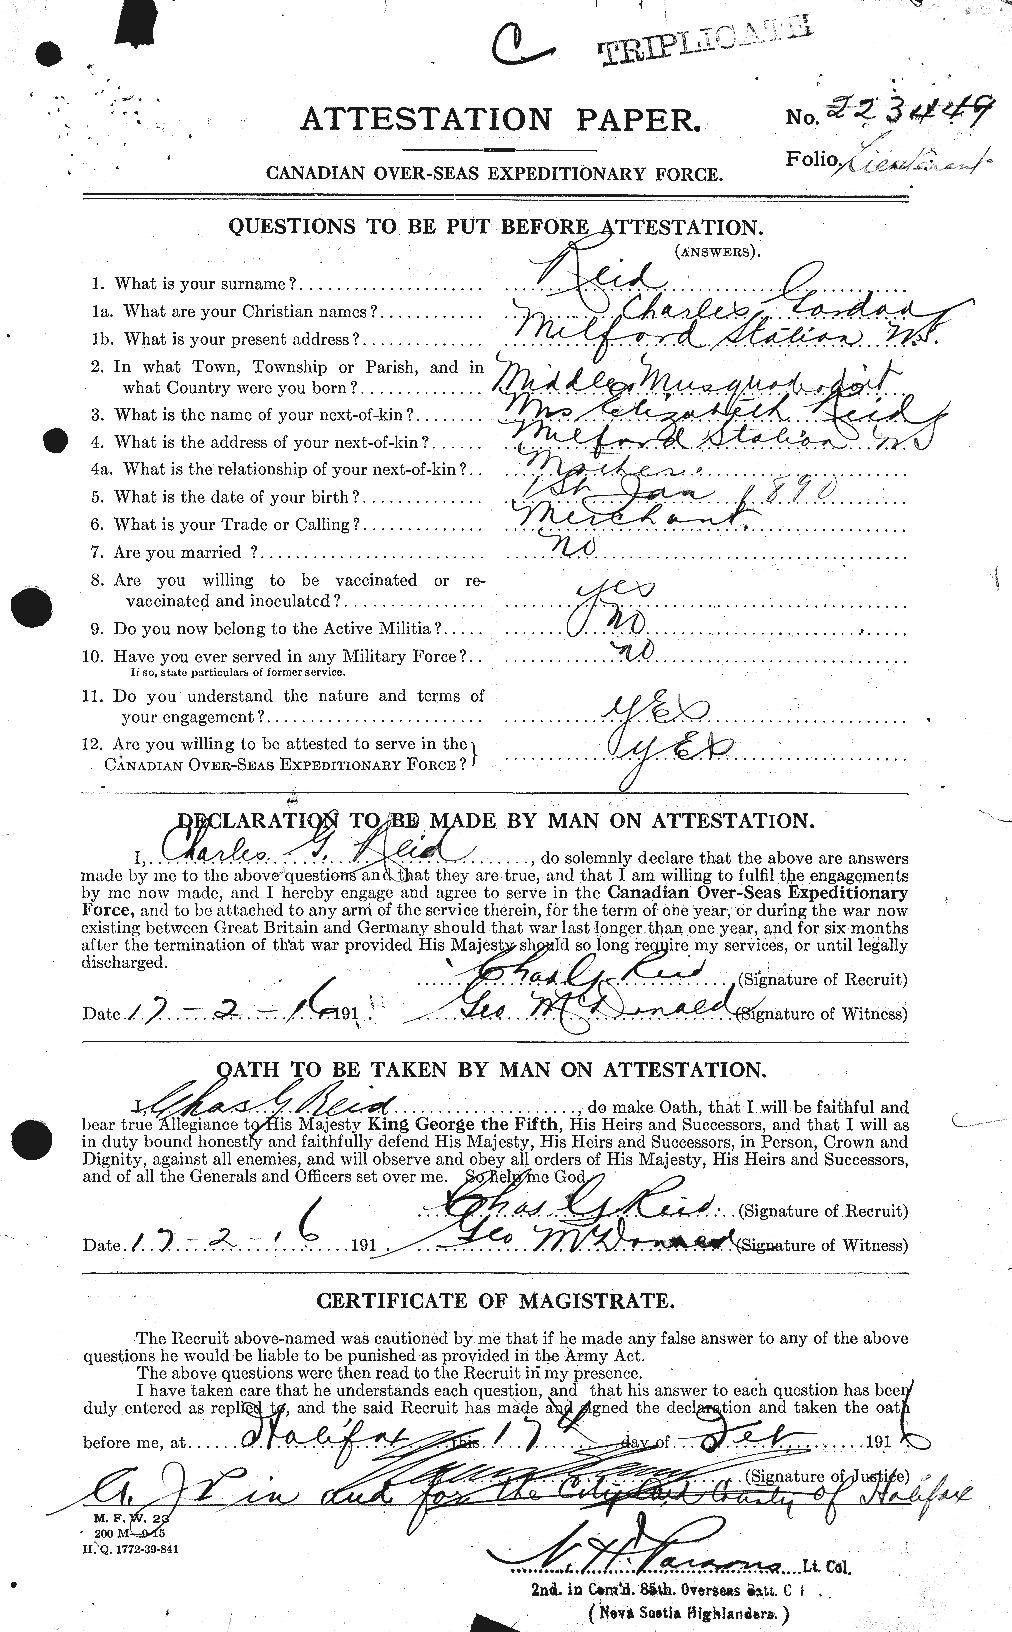 Personnel Records of the First World War - CEF 597889a